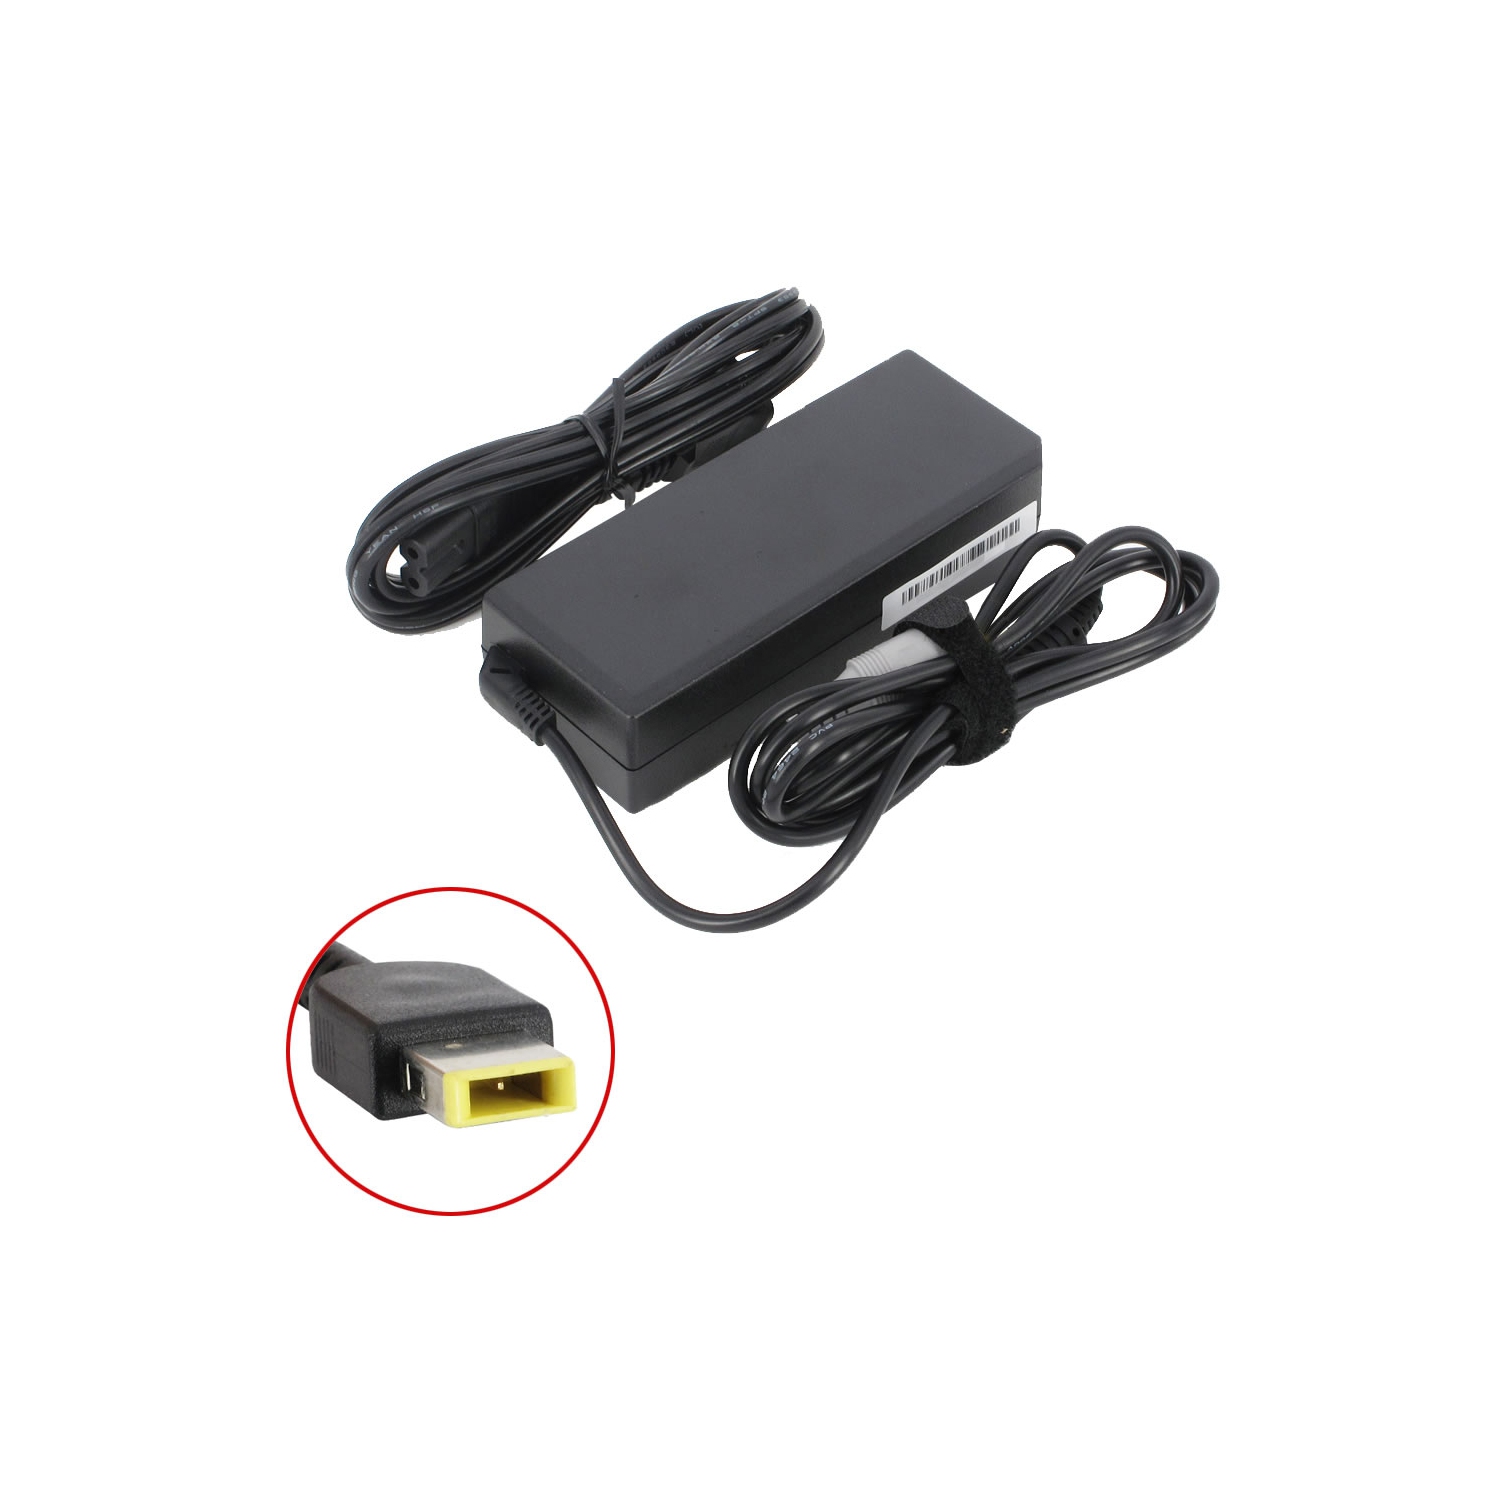 Brand New Laptop AC Adapter for Lenovo IdeaPad Yoga 11S (Touch)-59370508, ADP-65XB A, 0B47481, 45N0293, 45N0482, PA-1650-37LF